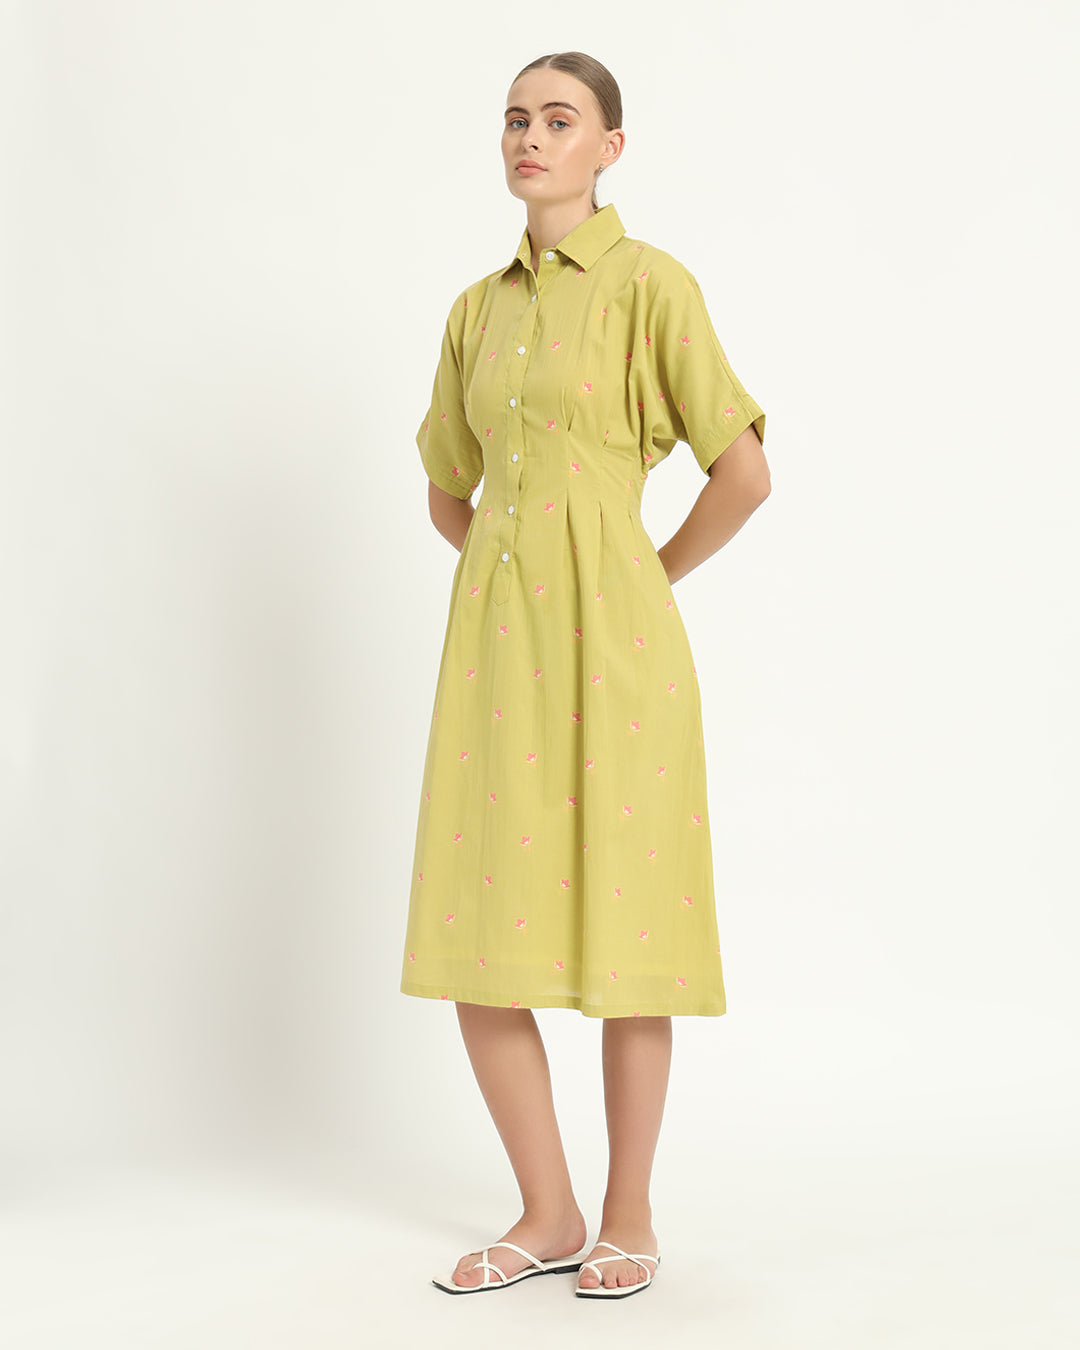 The Salford Lime Cosmos Dress